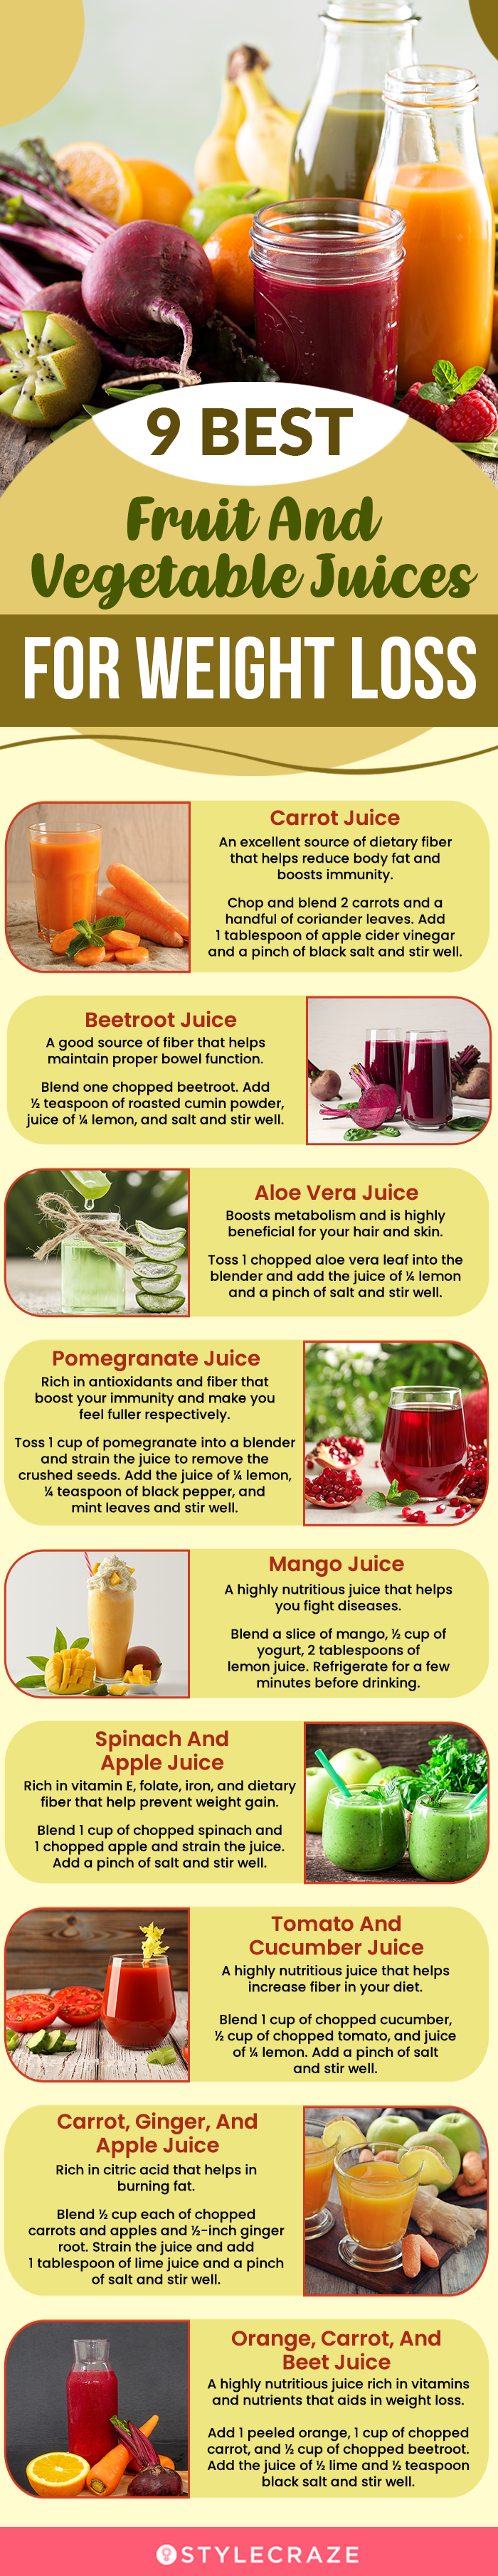 9 best fruit and vegetable juices for weight loss (infographic) 